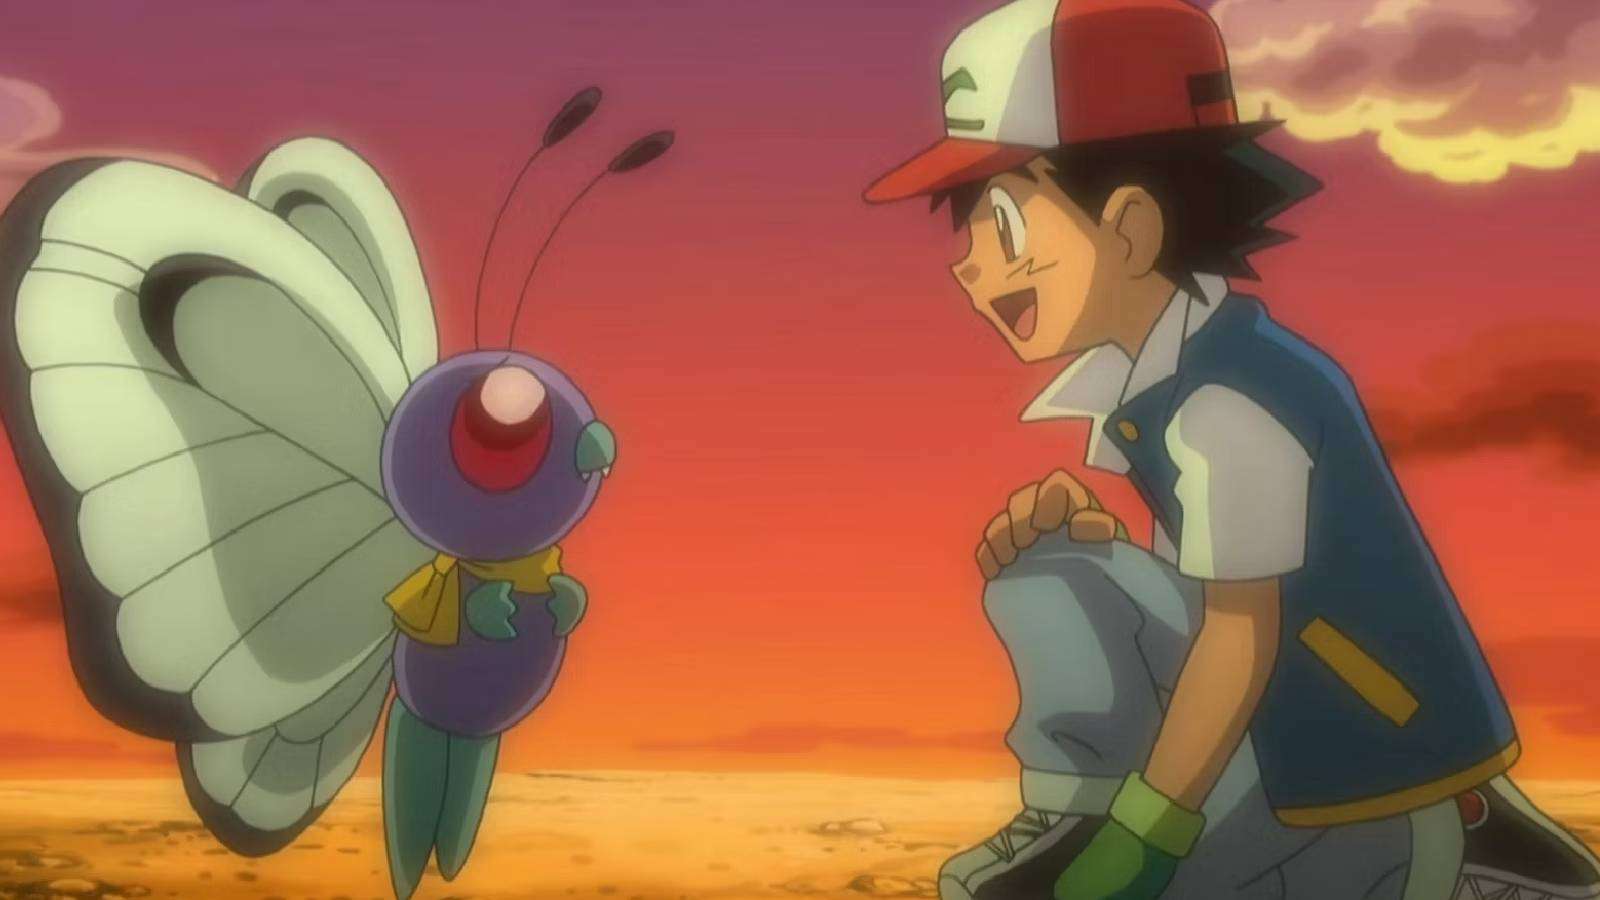 A screenshot from the Pokemon anime shows Ash Ketchum reuniting with his Butterfree